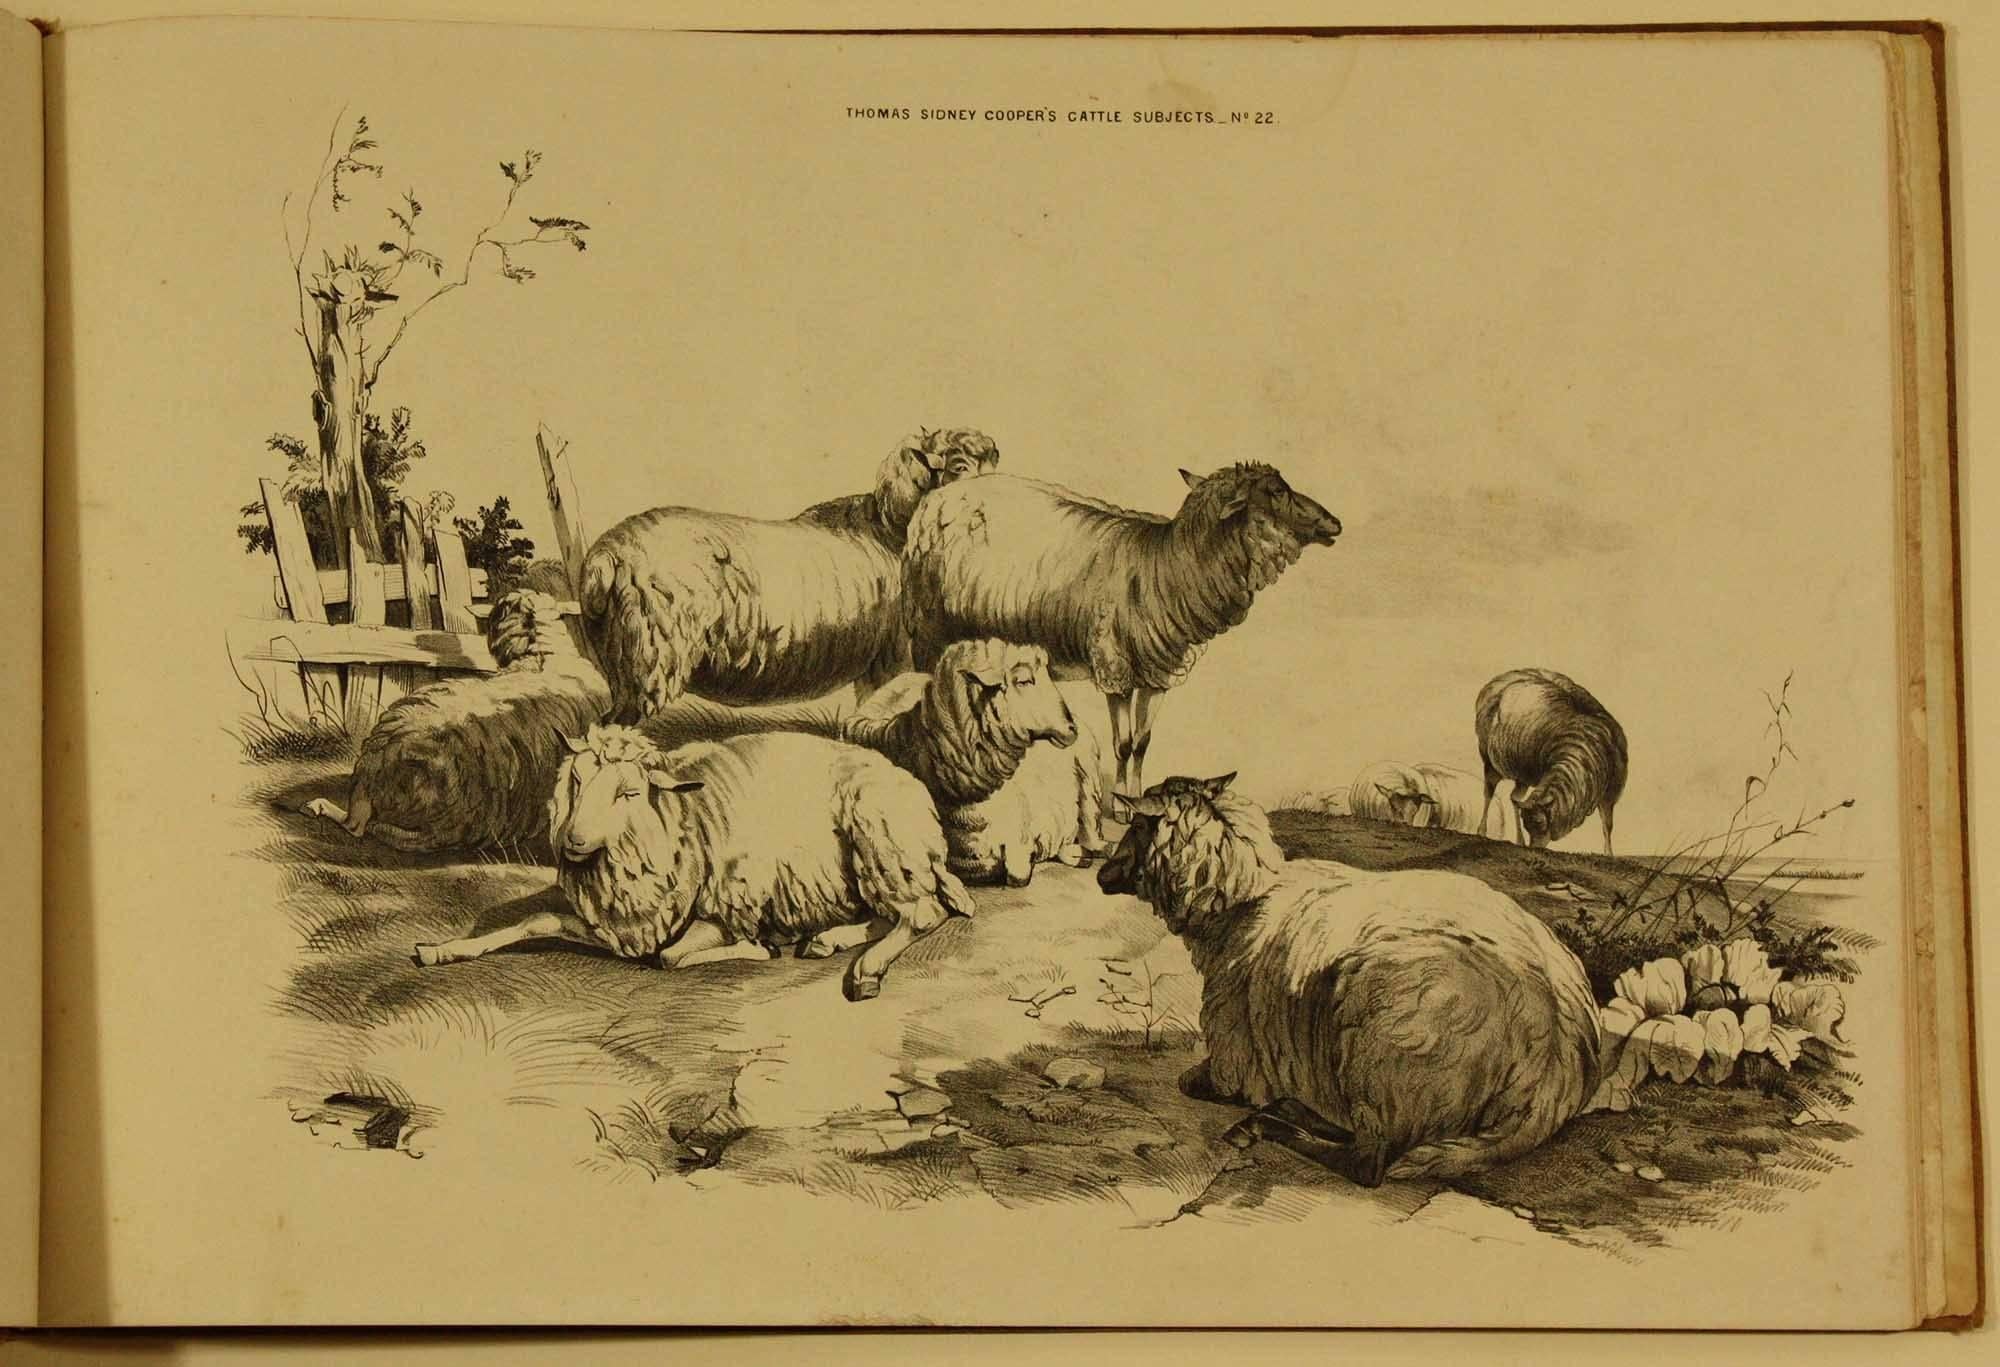 COOPER, Thomas Sidney  Groups of Cattle, Drawn from Nature Book 1839 London - Brown Animal Print by Thomas Sidney Cooper